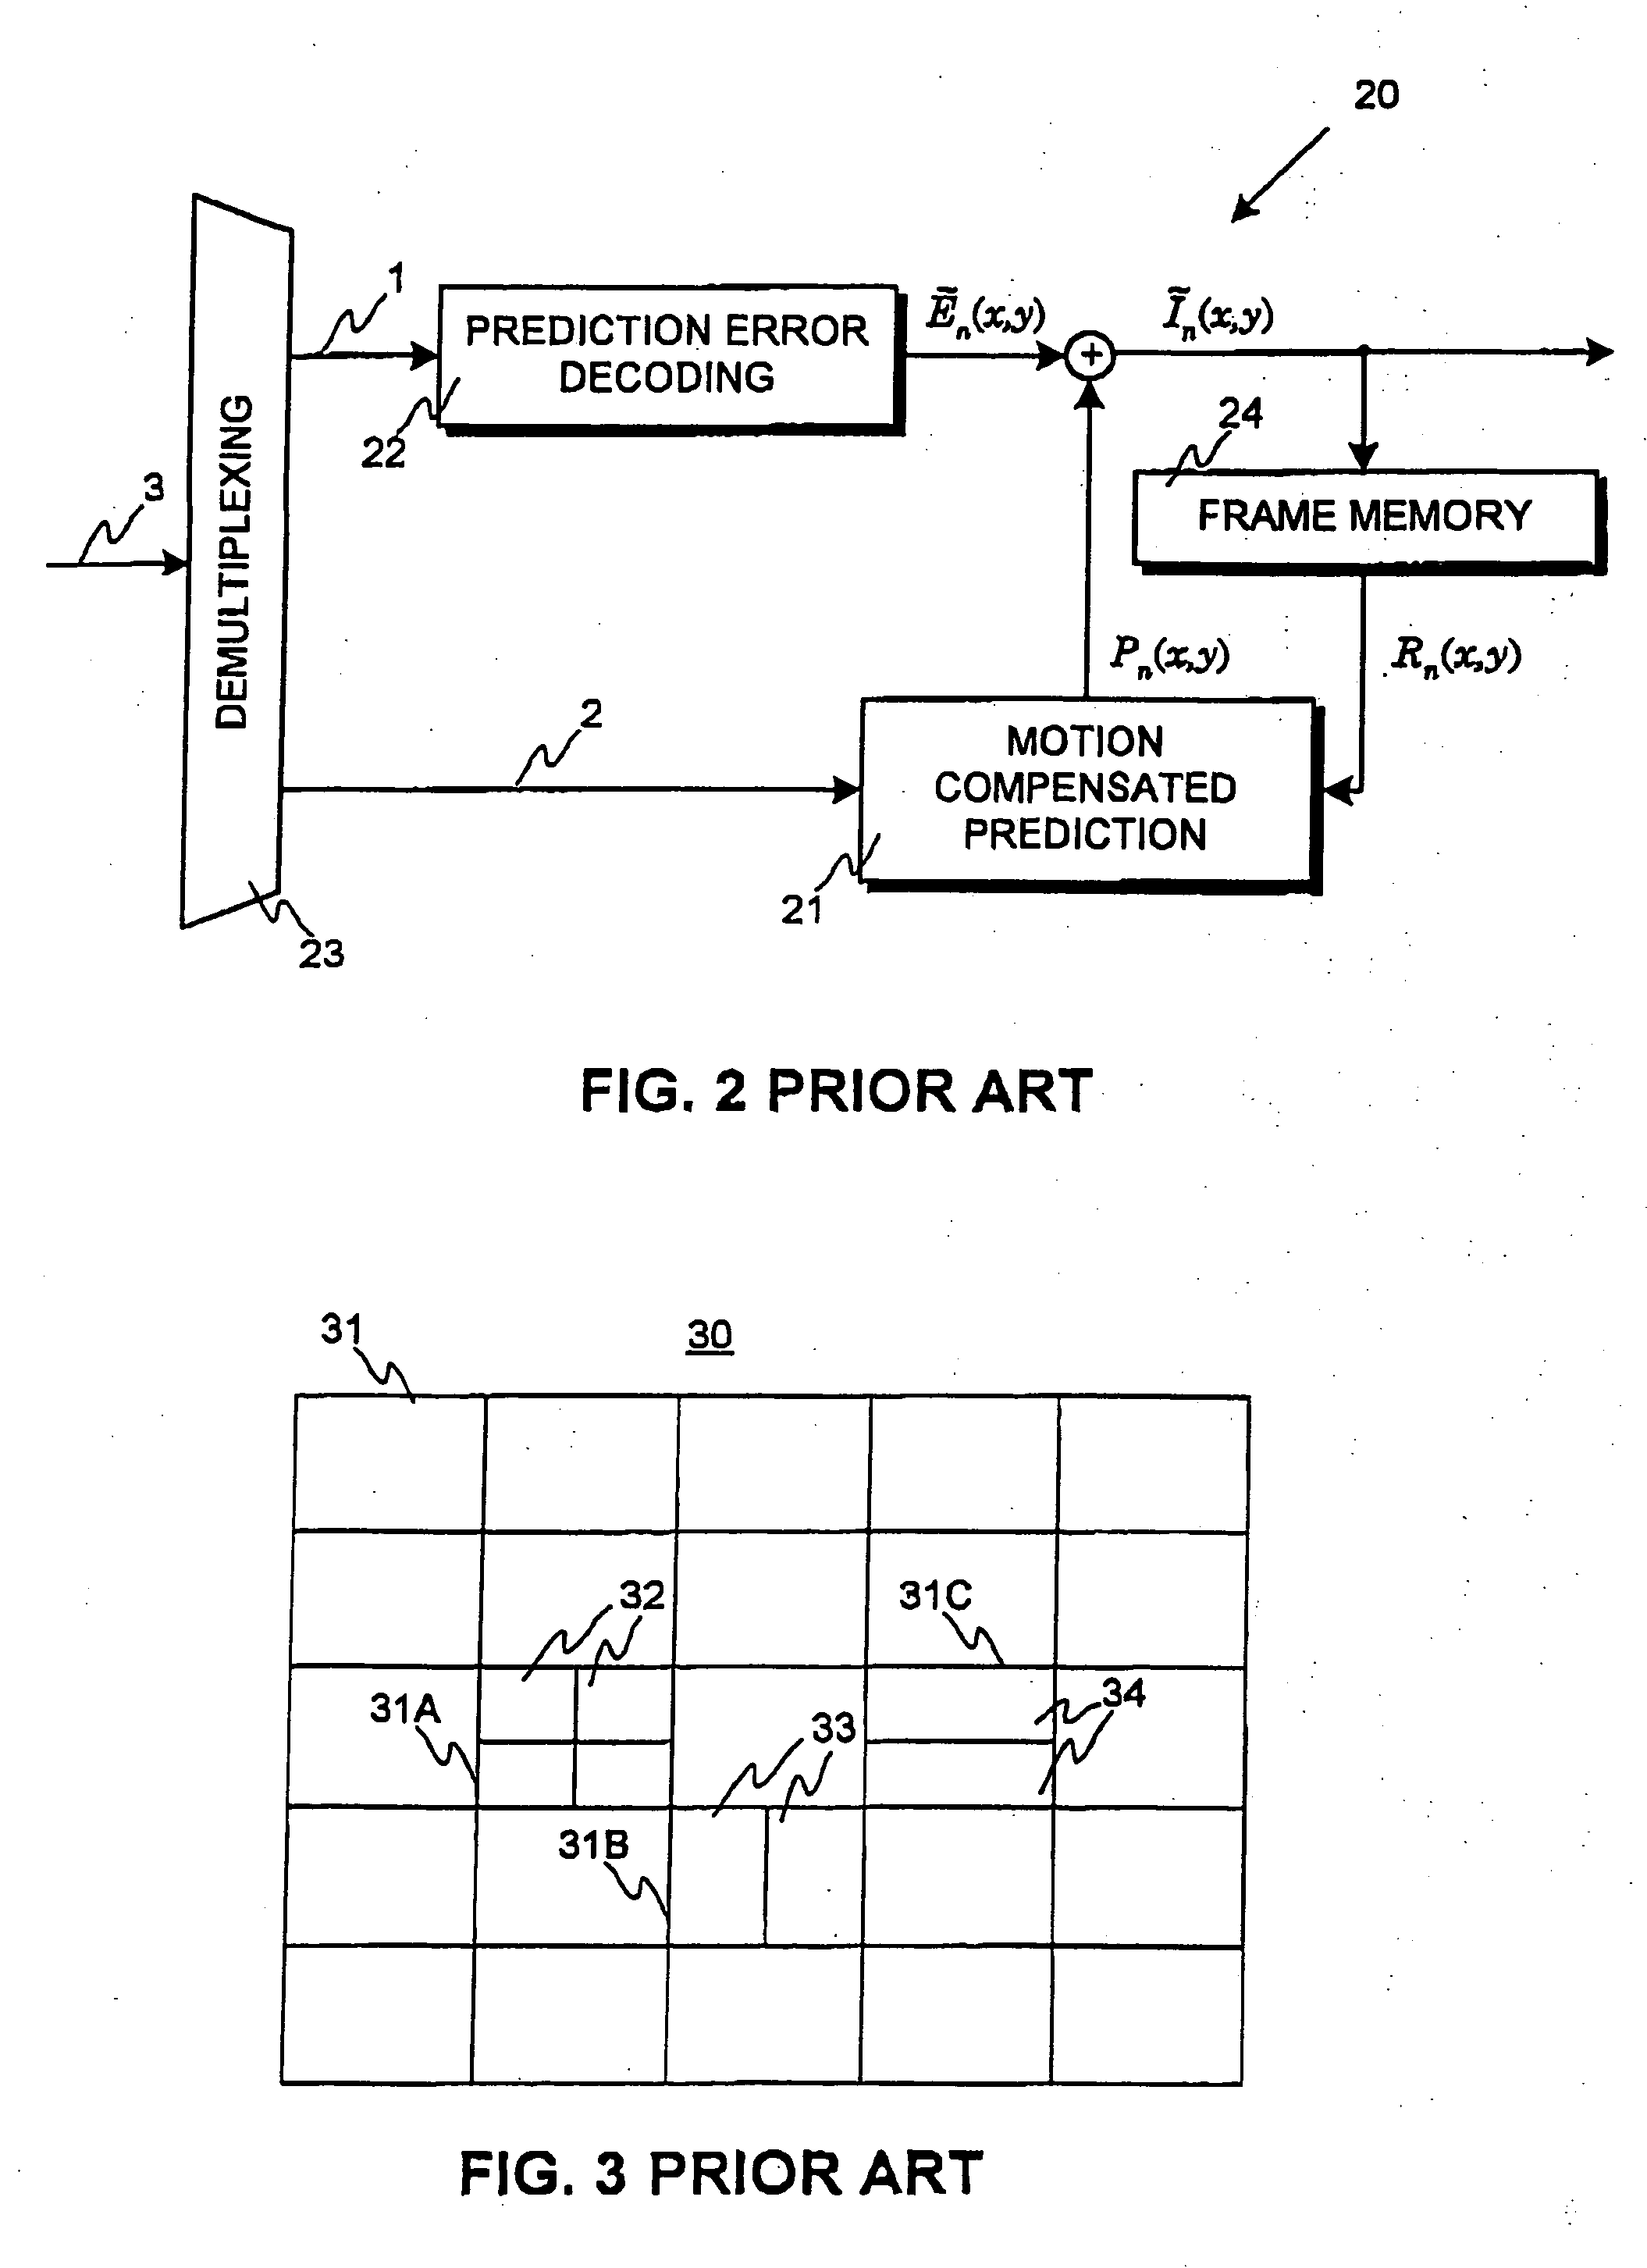 Method for encoding and decoding video information, a motion compensated video encoder and a coresponding decoder